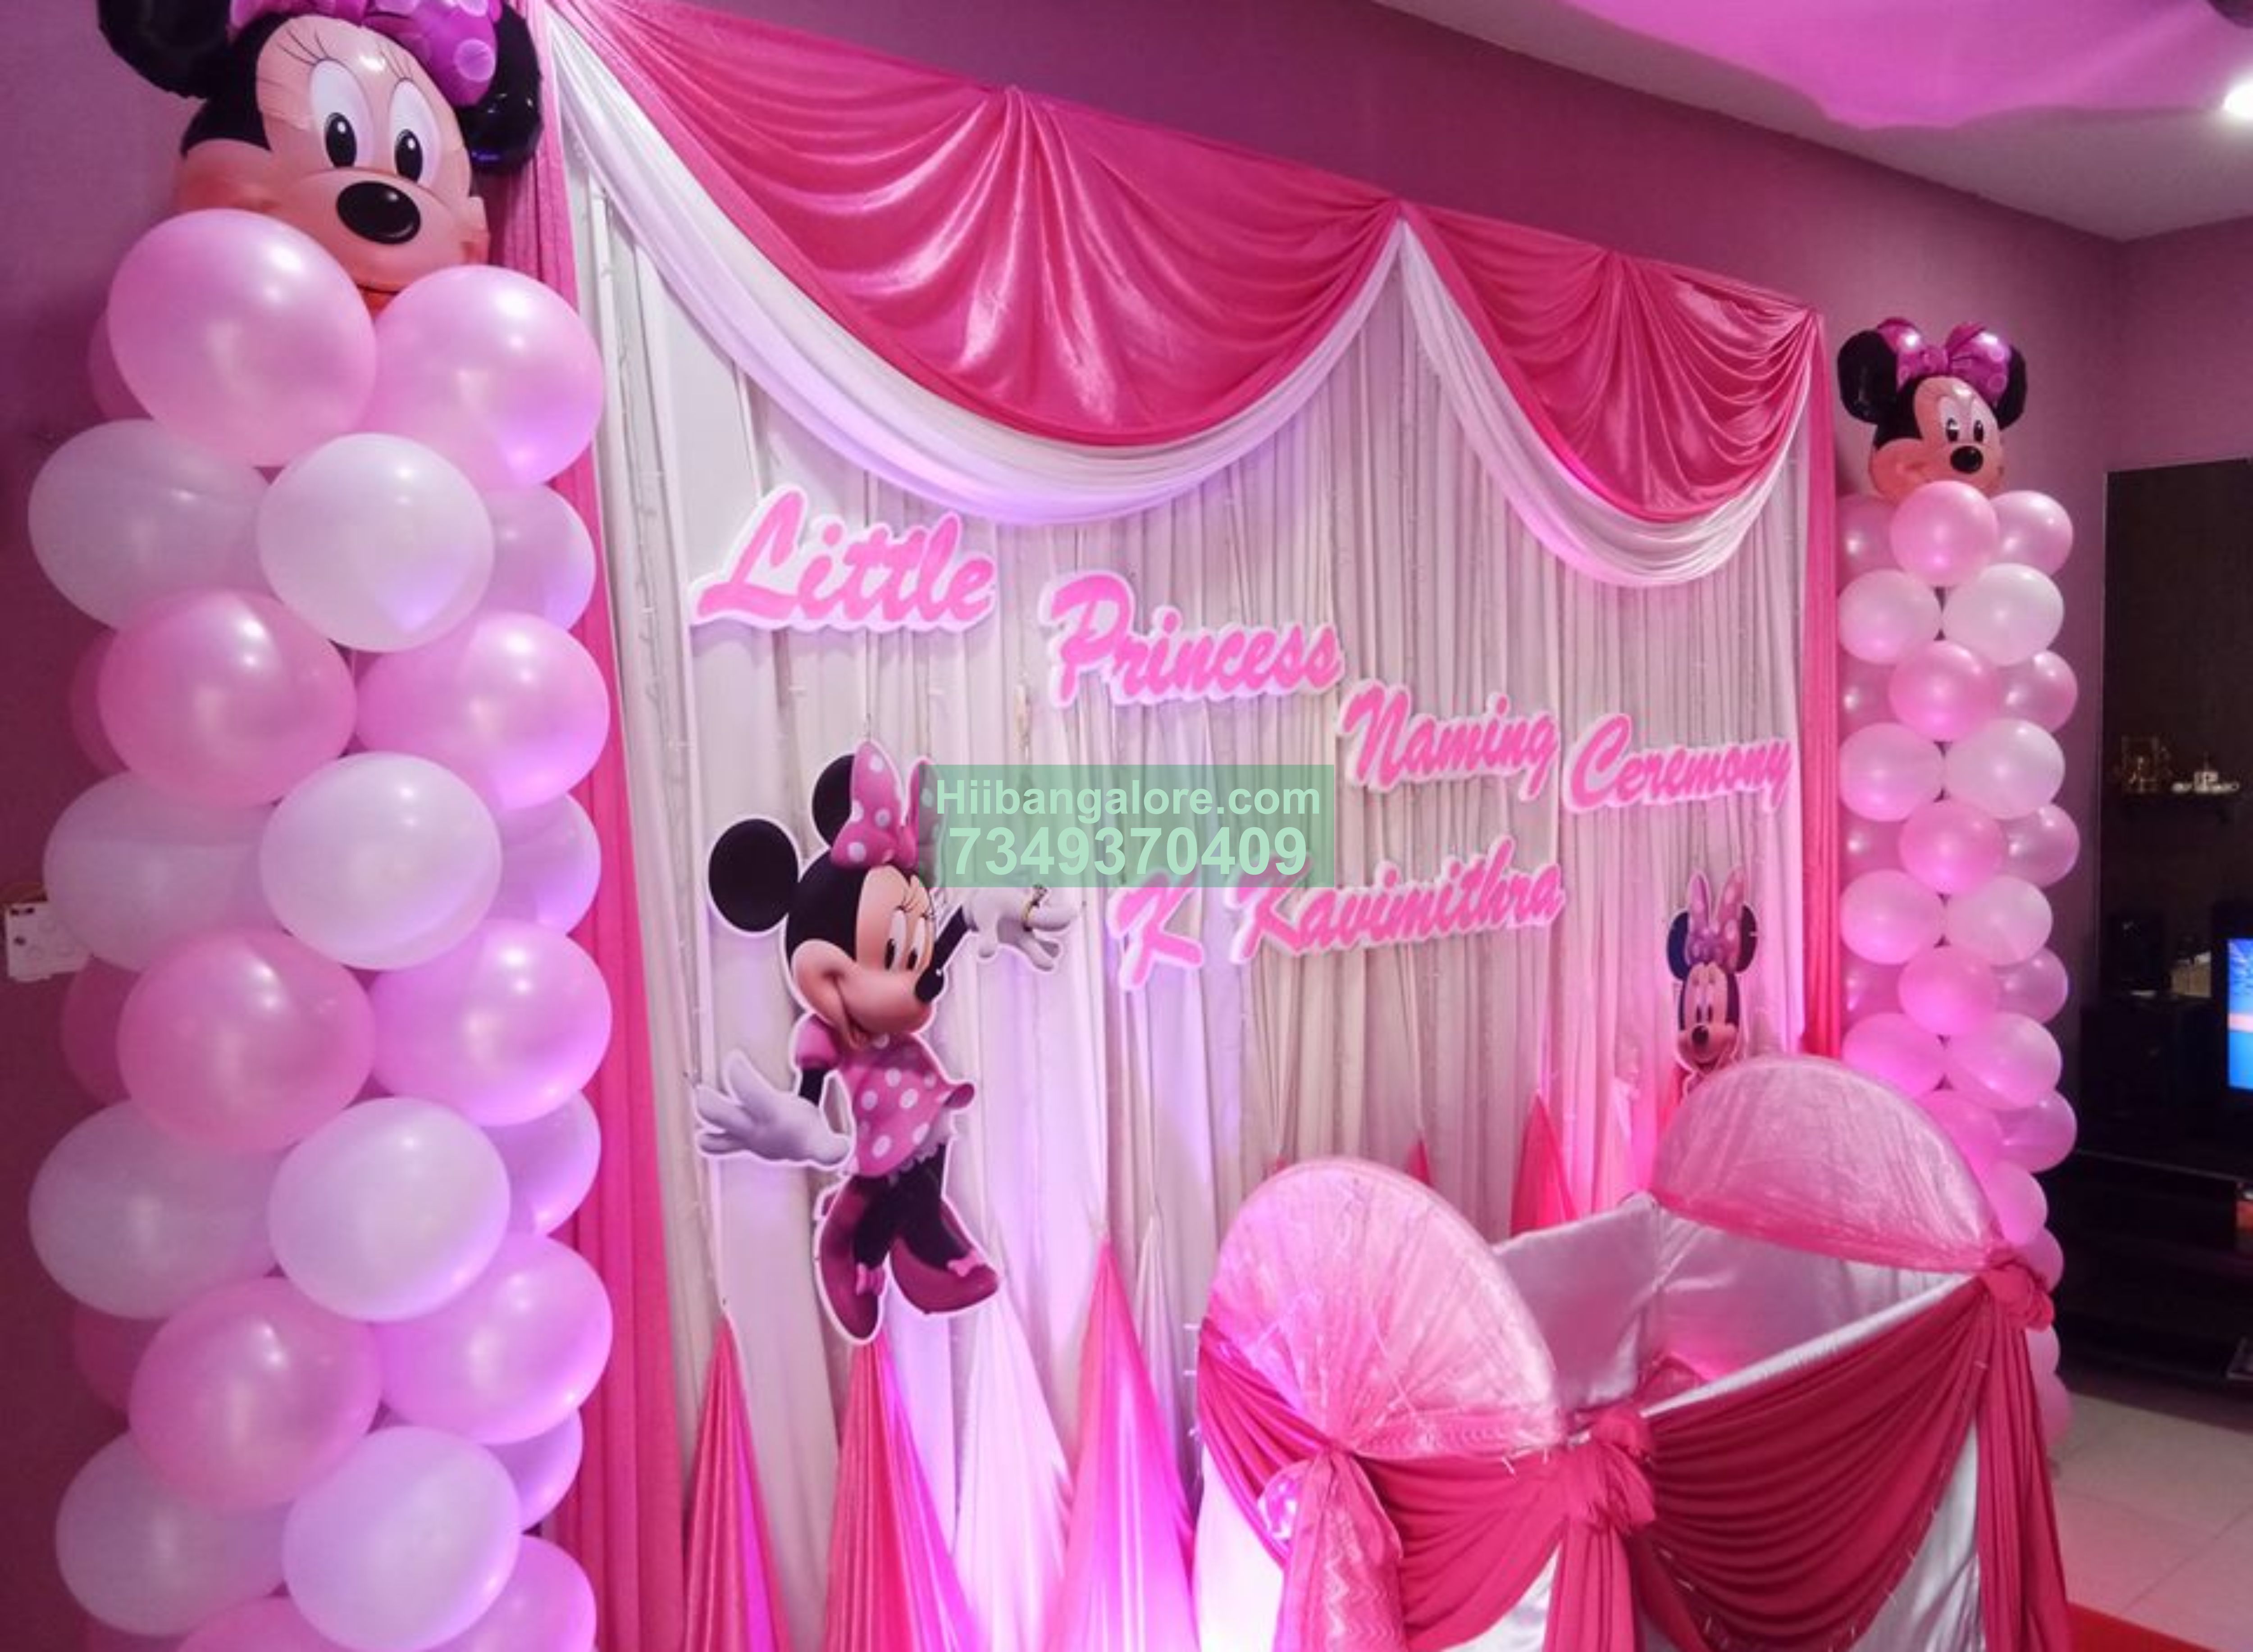 Minnie mouse theme naming ceremony decoration at home Bangalore